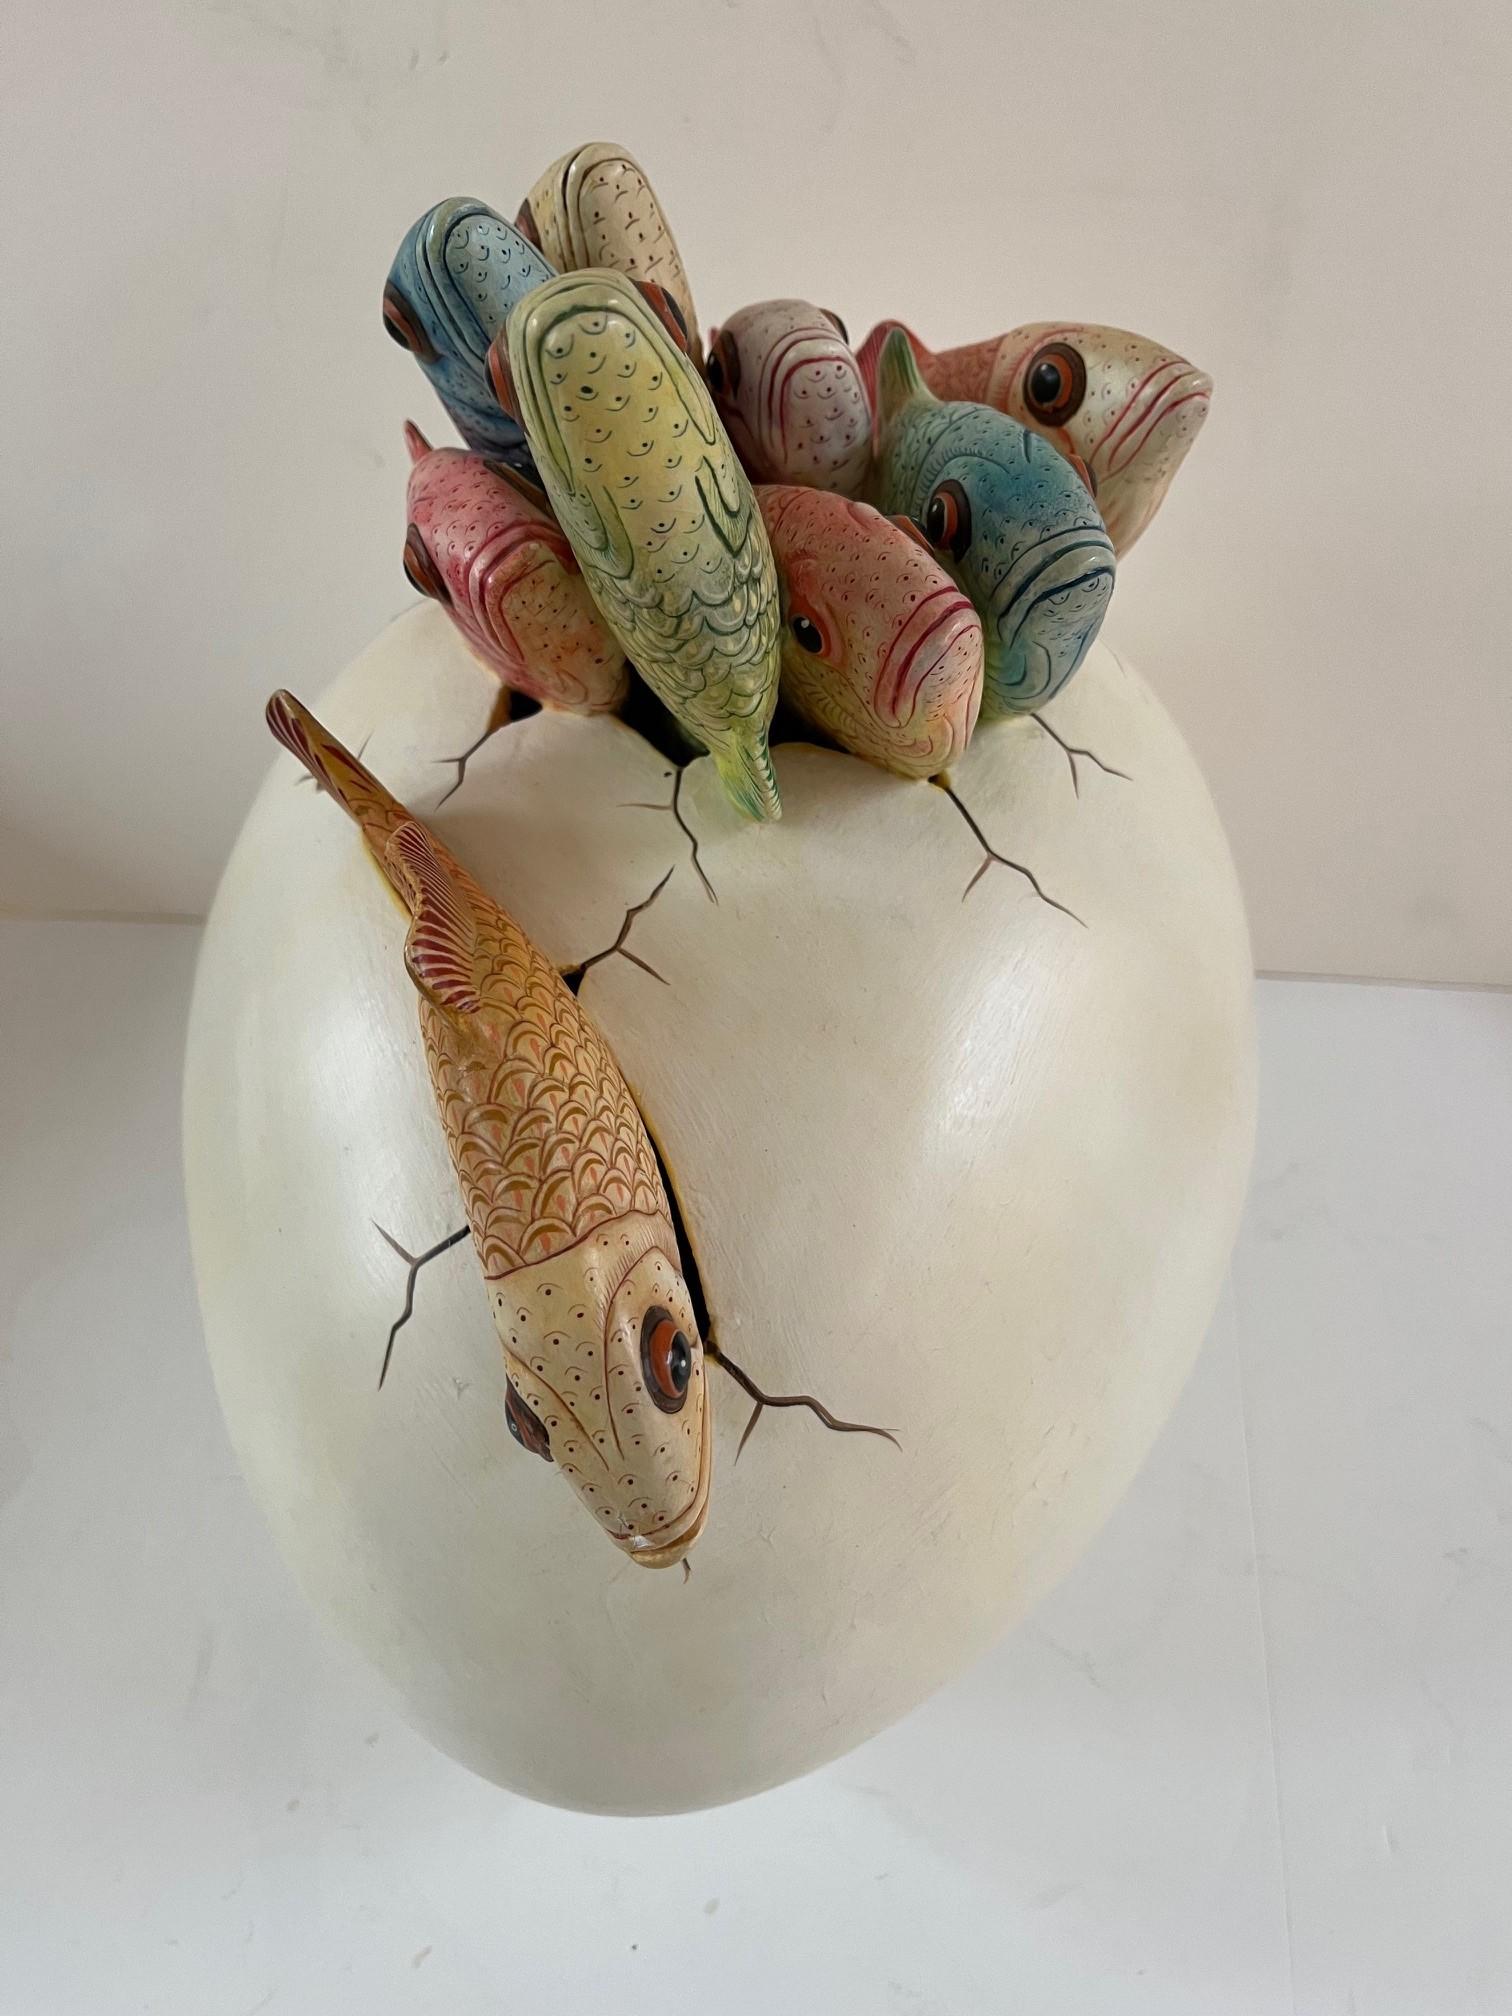 Vintage Large Ceramic Hatching Fish Egg Sculpture Figuring by Sergio Bustamente. For Sale 2